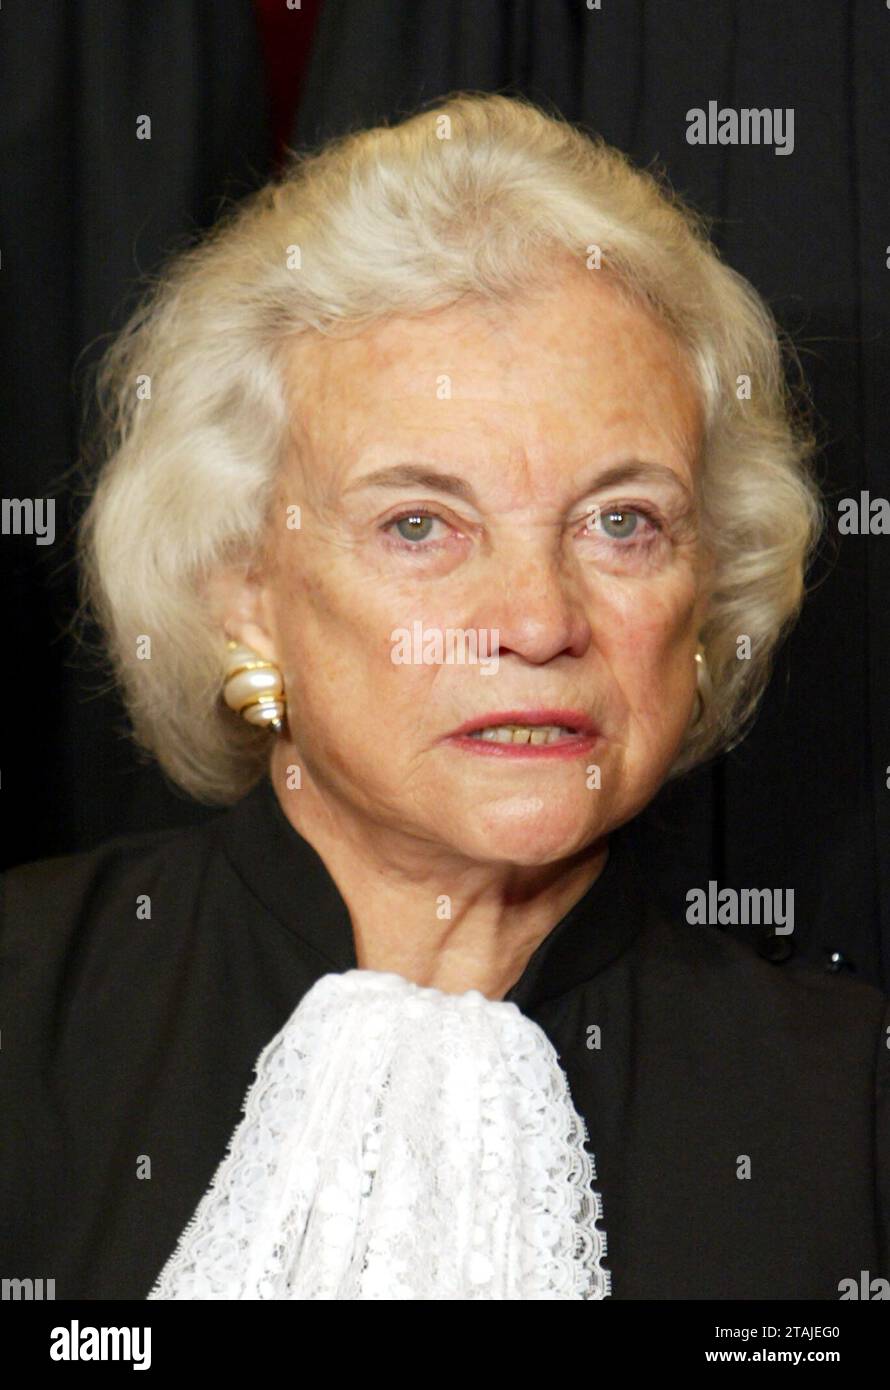 **FILE PHOTO** Sandra Day O'Connor Has Passed Away. Associate Justice of the United States Supreme Court Sandra Day O'Connor poses during a group portrait session with the members of the United States Supreme Court, at the Supreme Court Building in Washington, DC on December 5, 2003. O'Connor made history as the first woman on the high court when former United States President Ronald Reagan nominated her. She took her seat September 25, 1981. Credit: Mark Wilson/Pool via CNP/MediaPunch Stock Photo